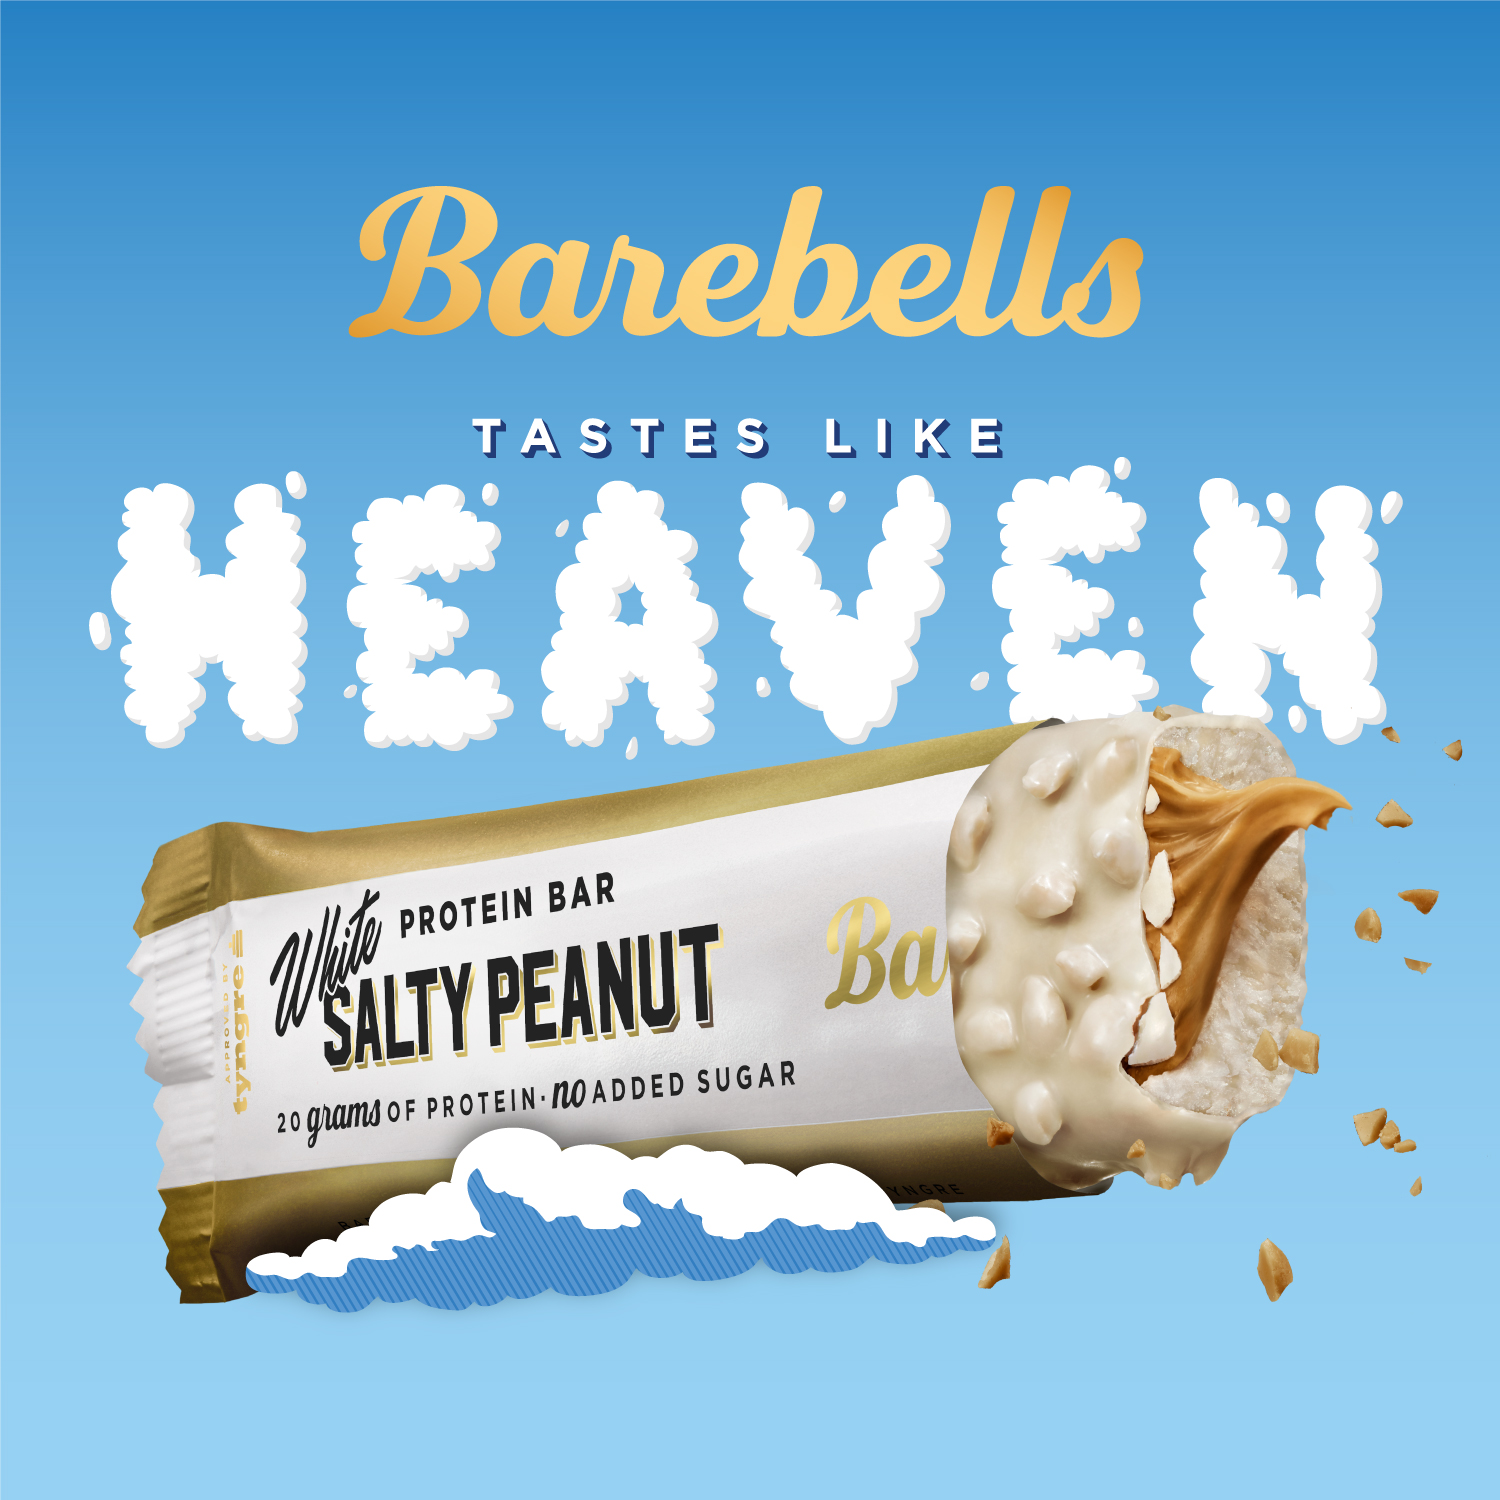 Barebells launches new White Salty Peanut protein bar